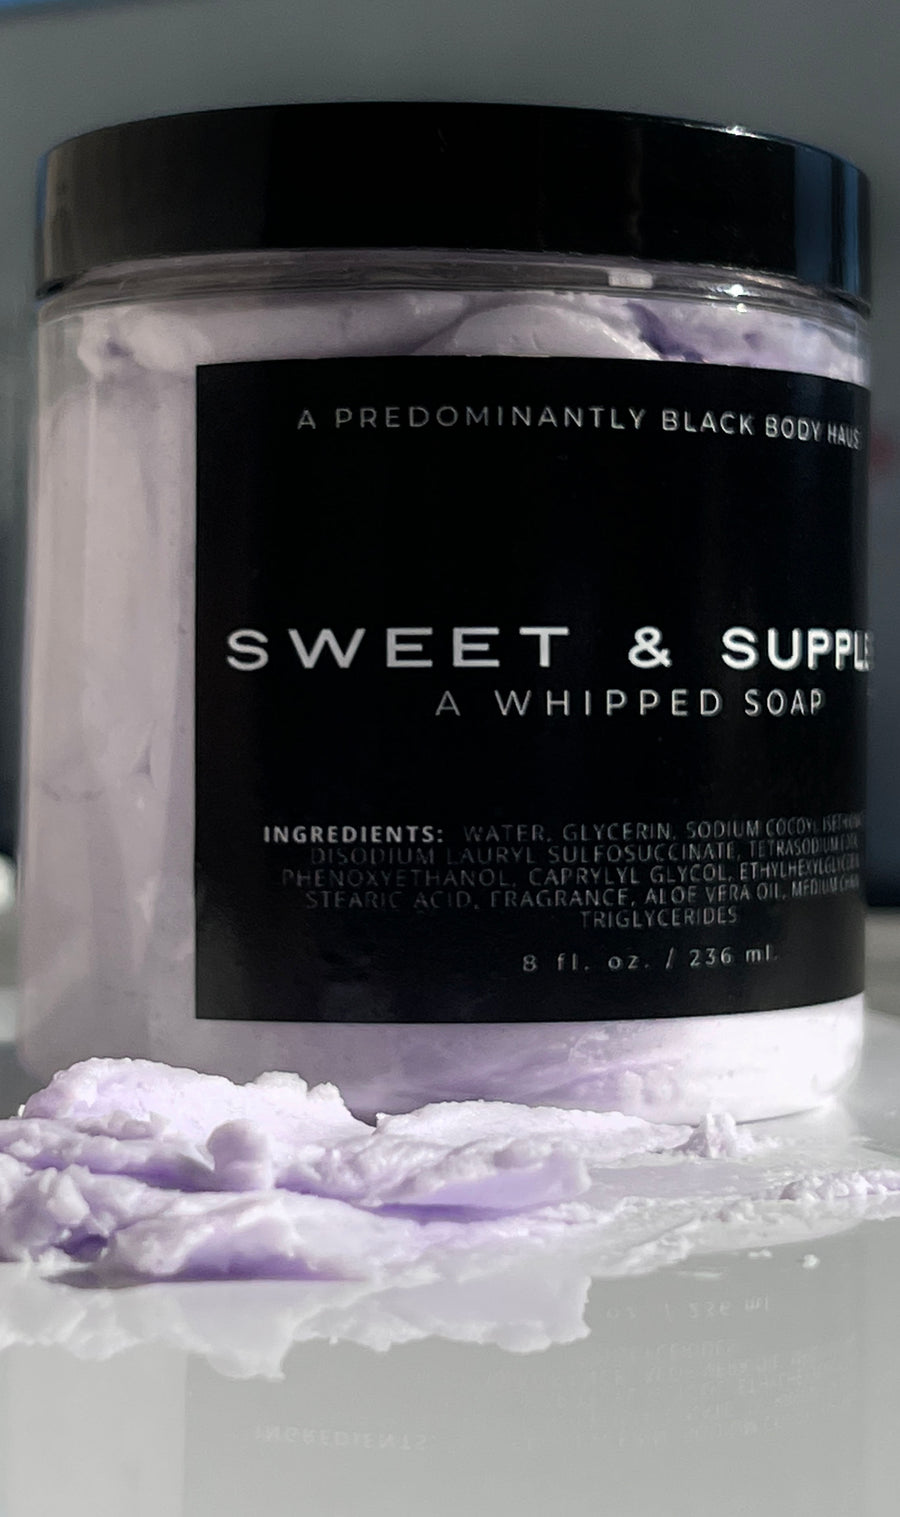 BODY HAUS - SWEET & SUPPLE, A WHIPPED BODY SOAP